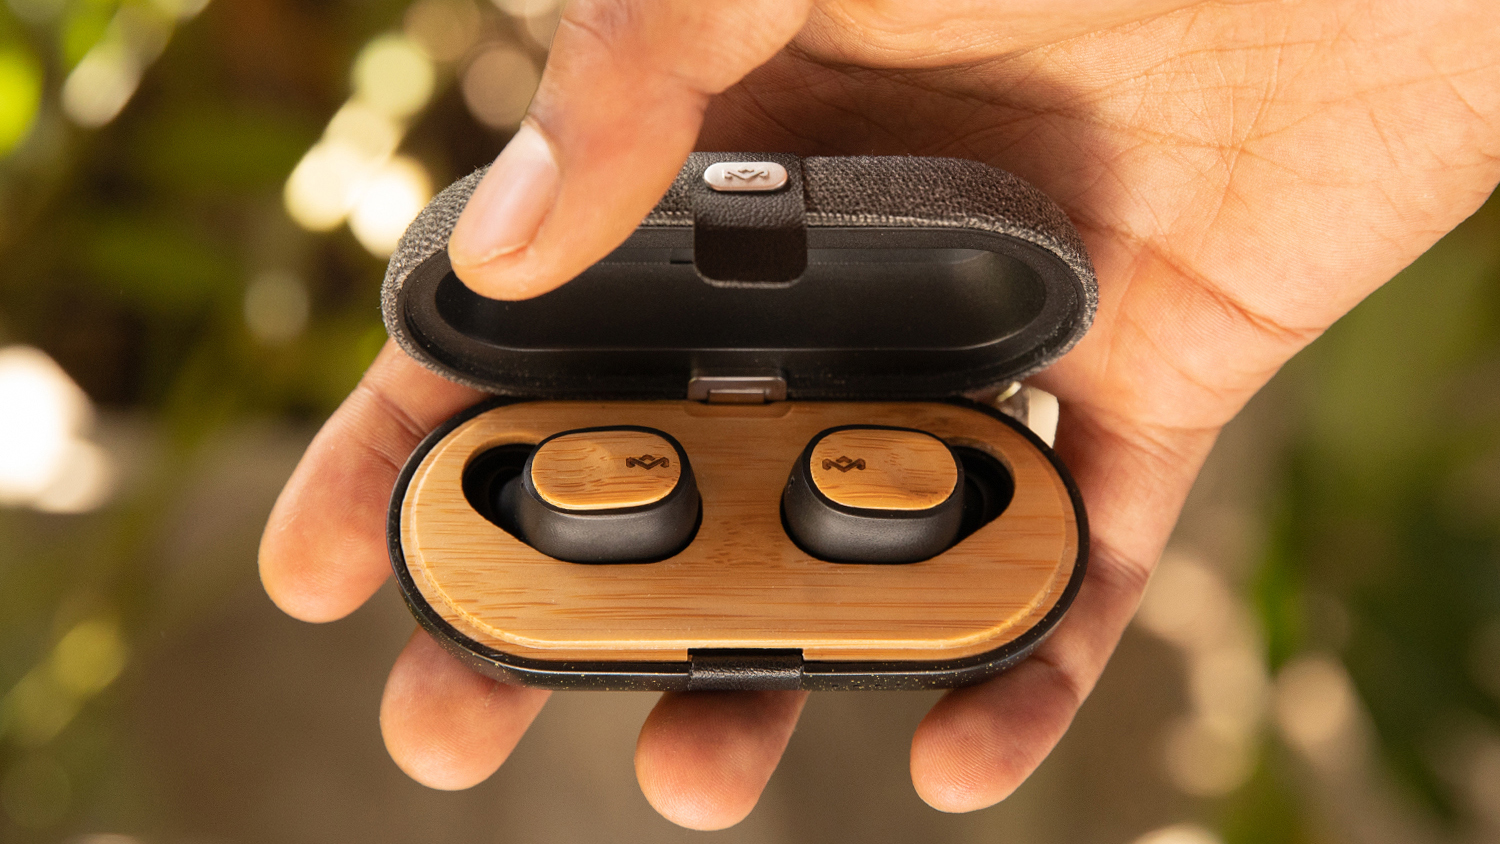 eco-friendly Liberate Air earbuds aim 